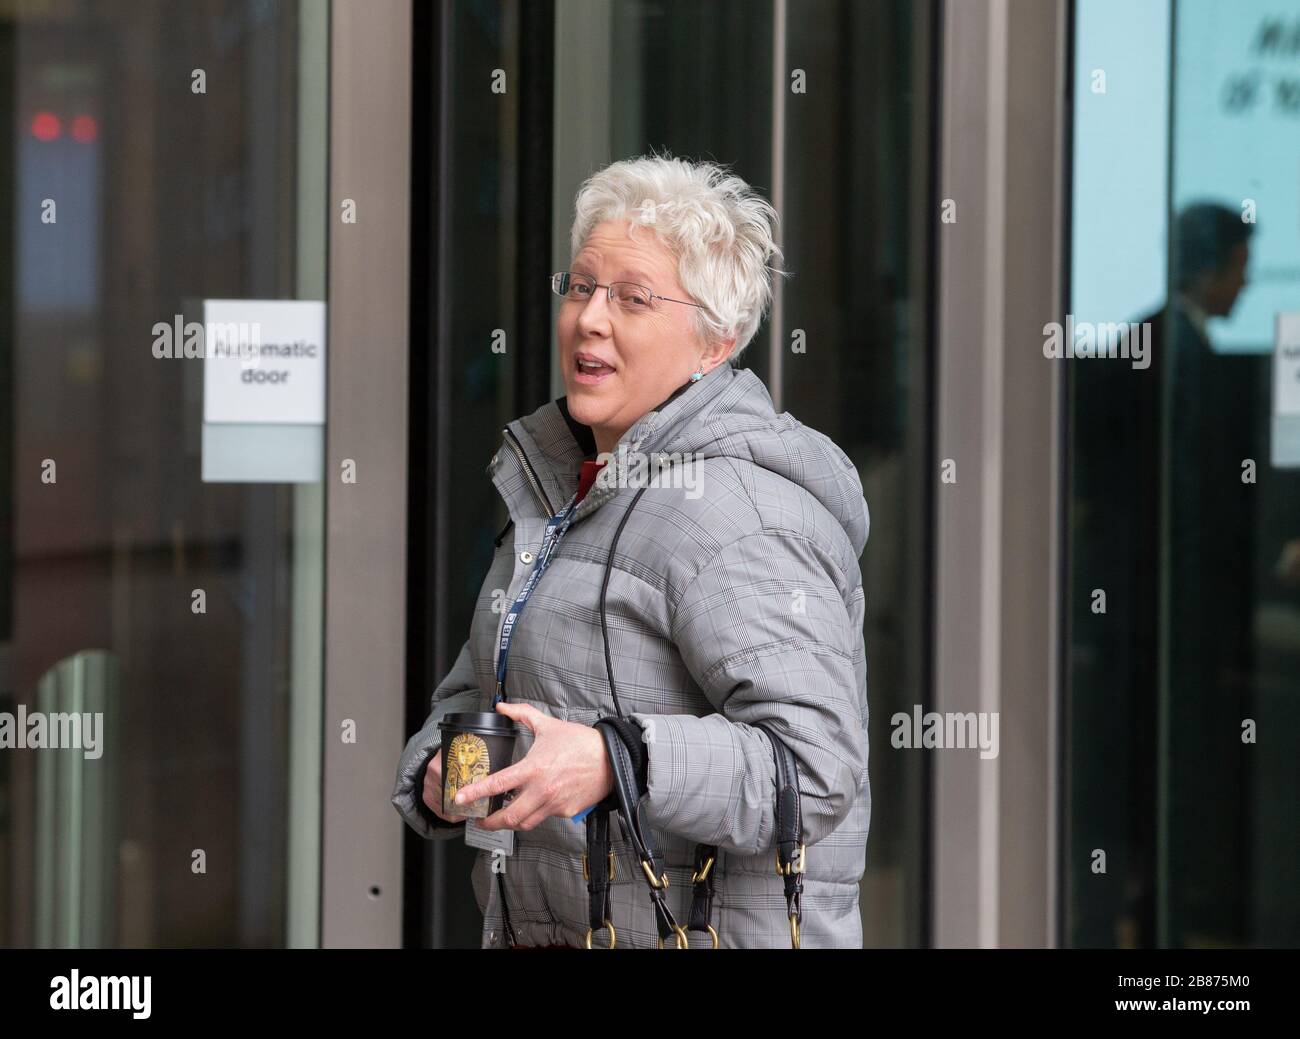 Carrie Gracie, former China editor for BBC News, arrives at the BBC studios in London. She resigned in Jan 2018 citing gender pay discrimination. Stock Photo